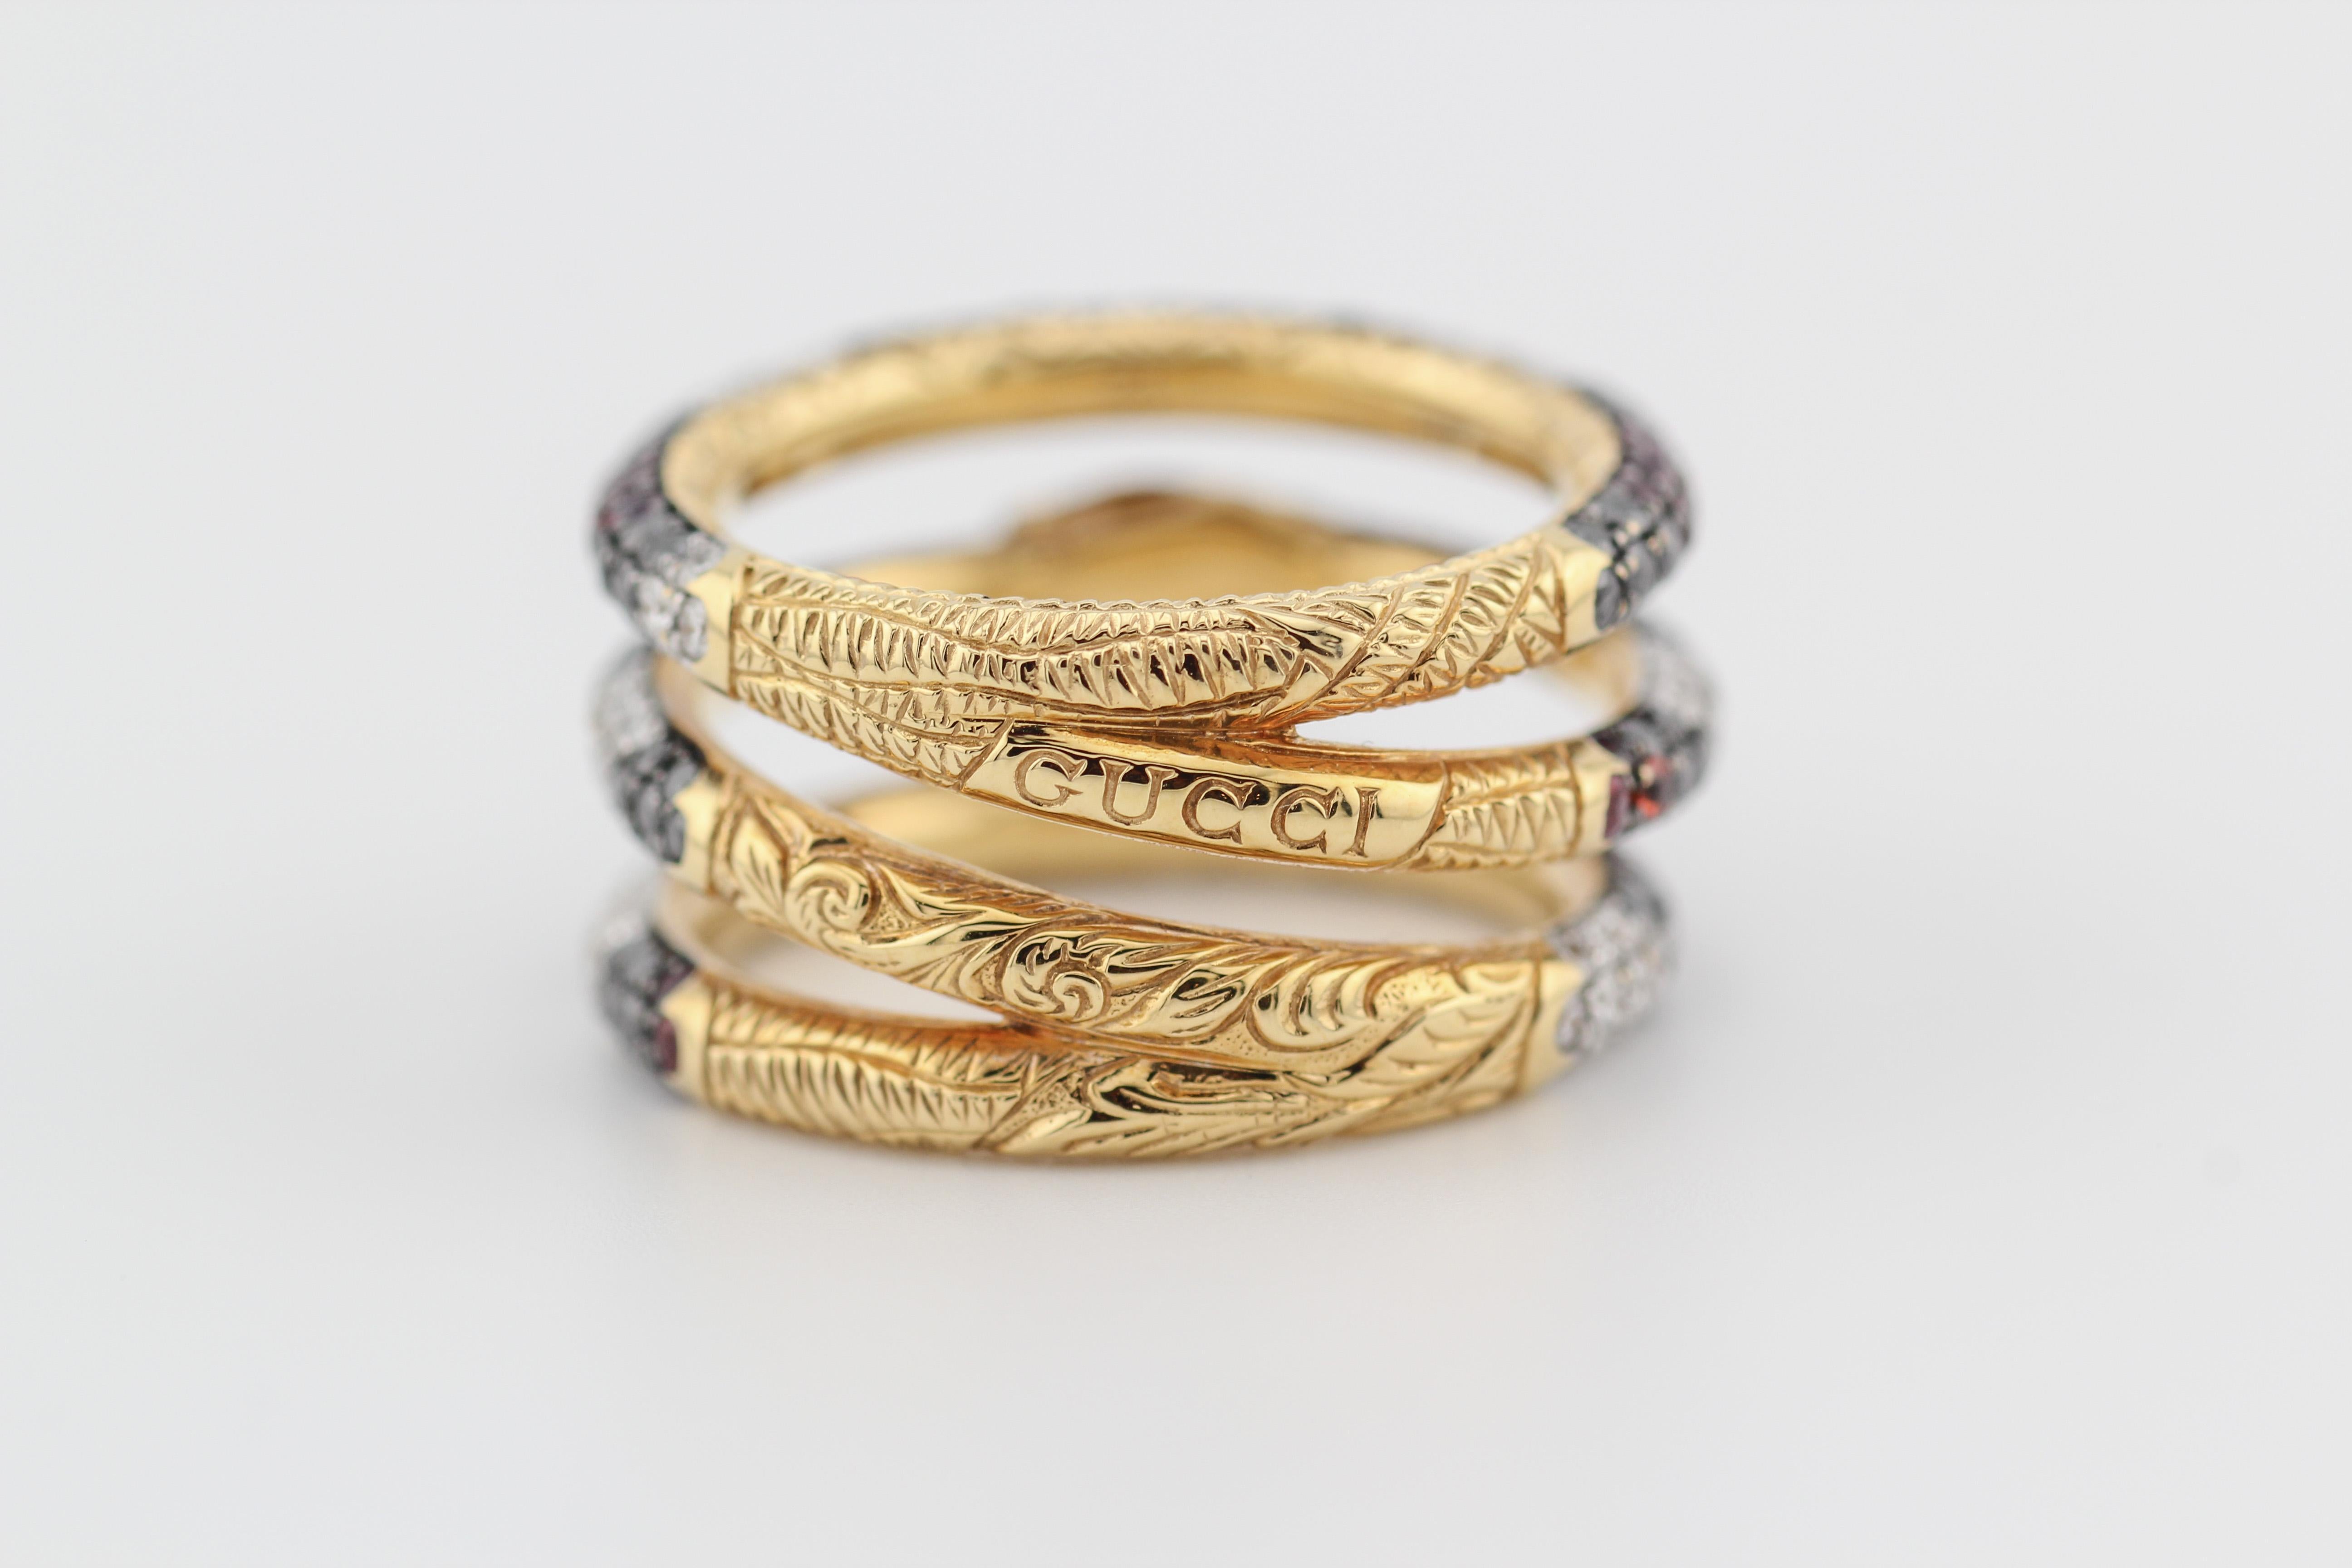 Gucci Ouroboros Gemstone 18k Yellow Gold Kingsnake Three Band Ring Size 6 In Excellent Condition For Sale In Bellmore, NY